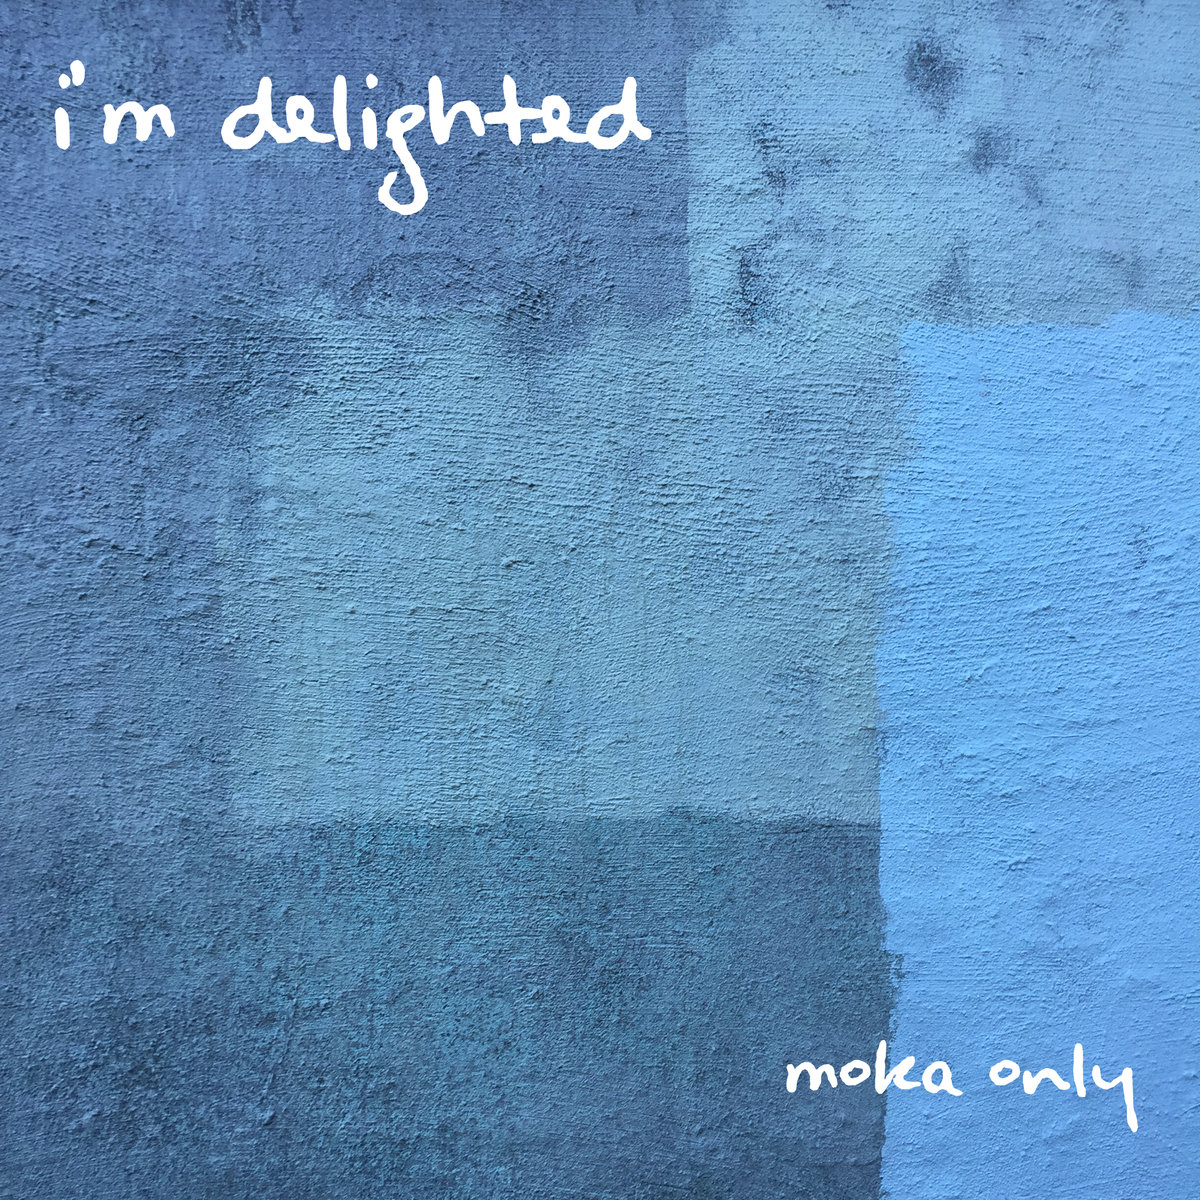 Moka Only - "I'm Delighted" (Release)